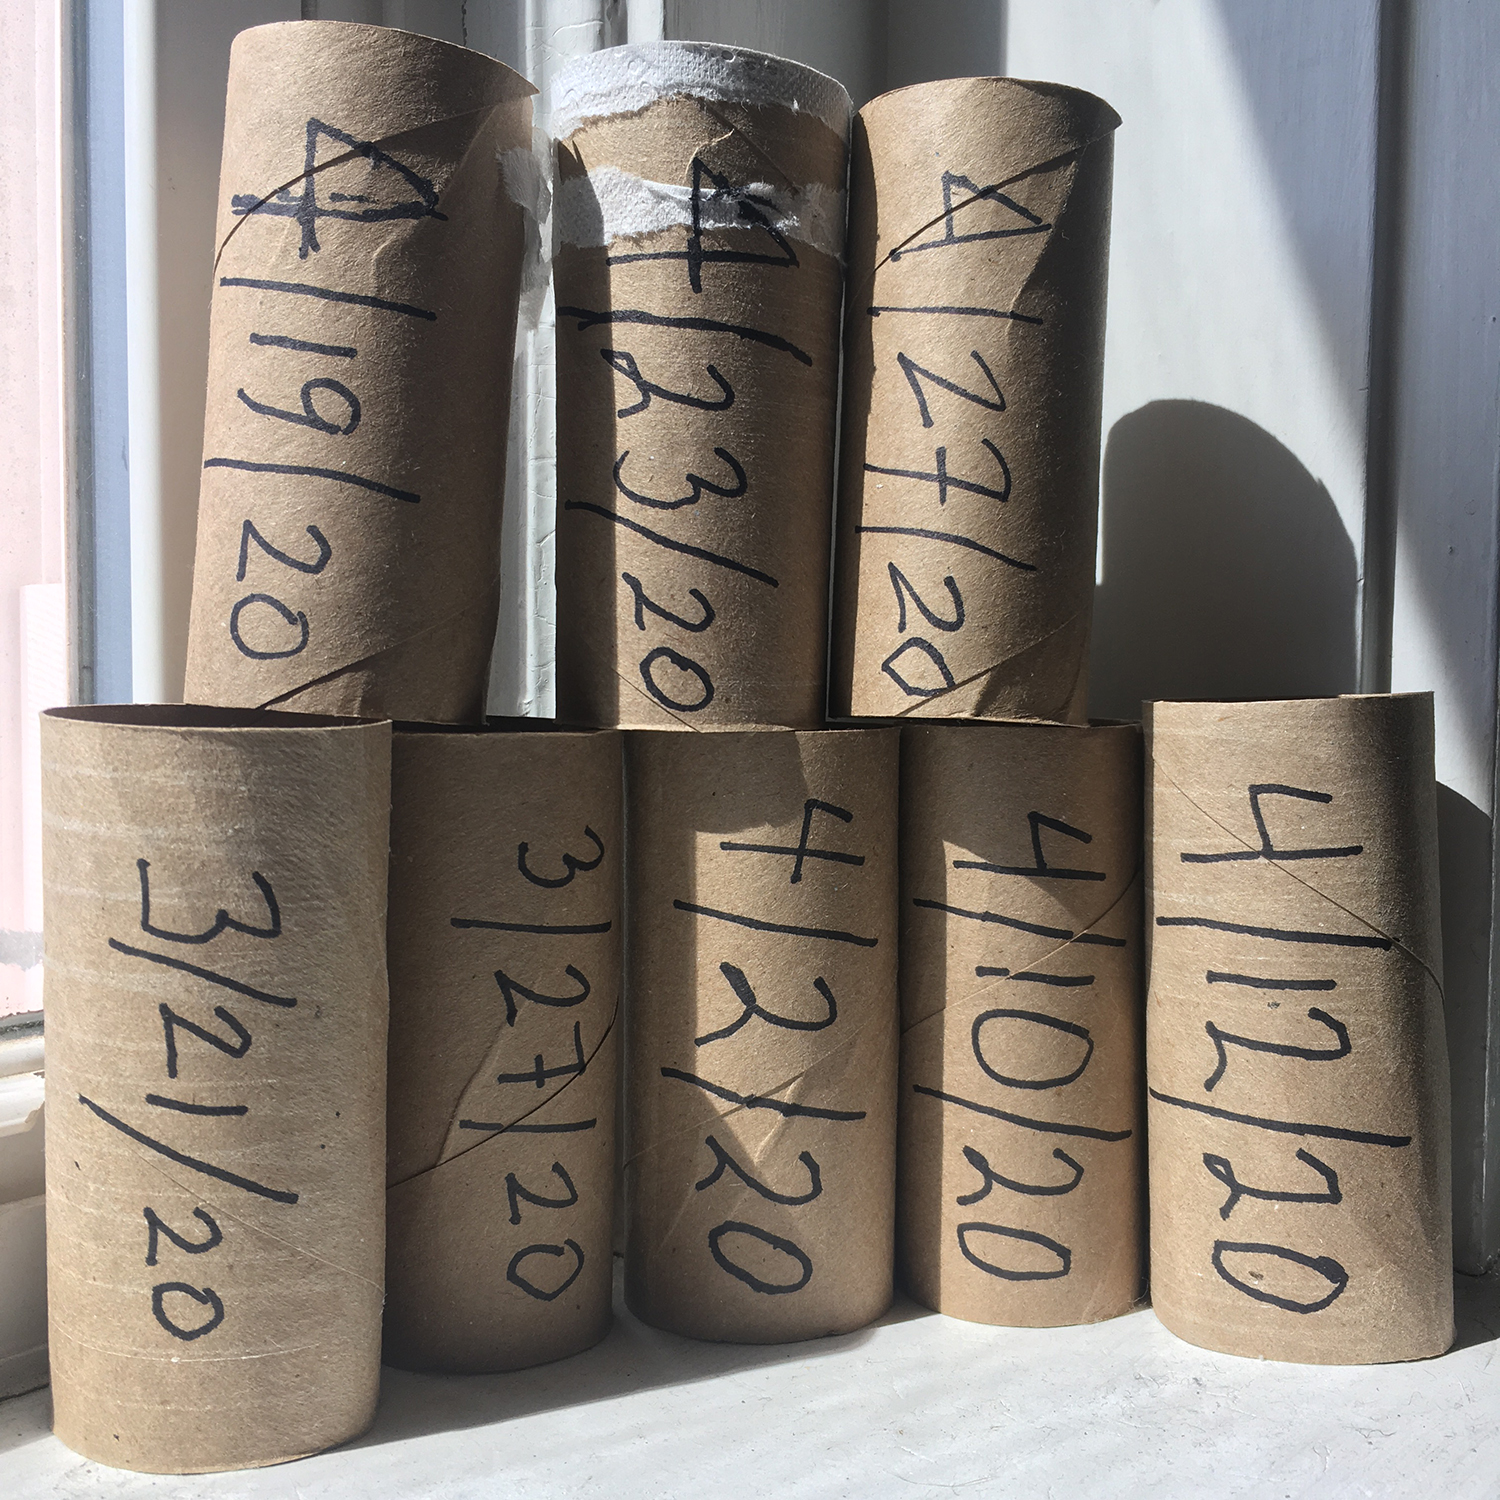 toilet paper rolls time dated with a marker